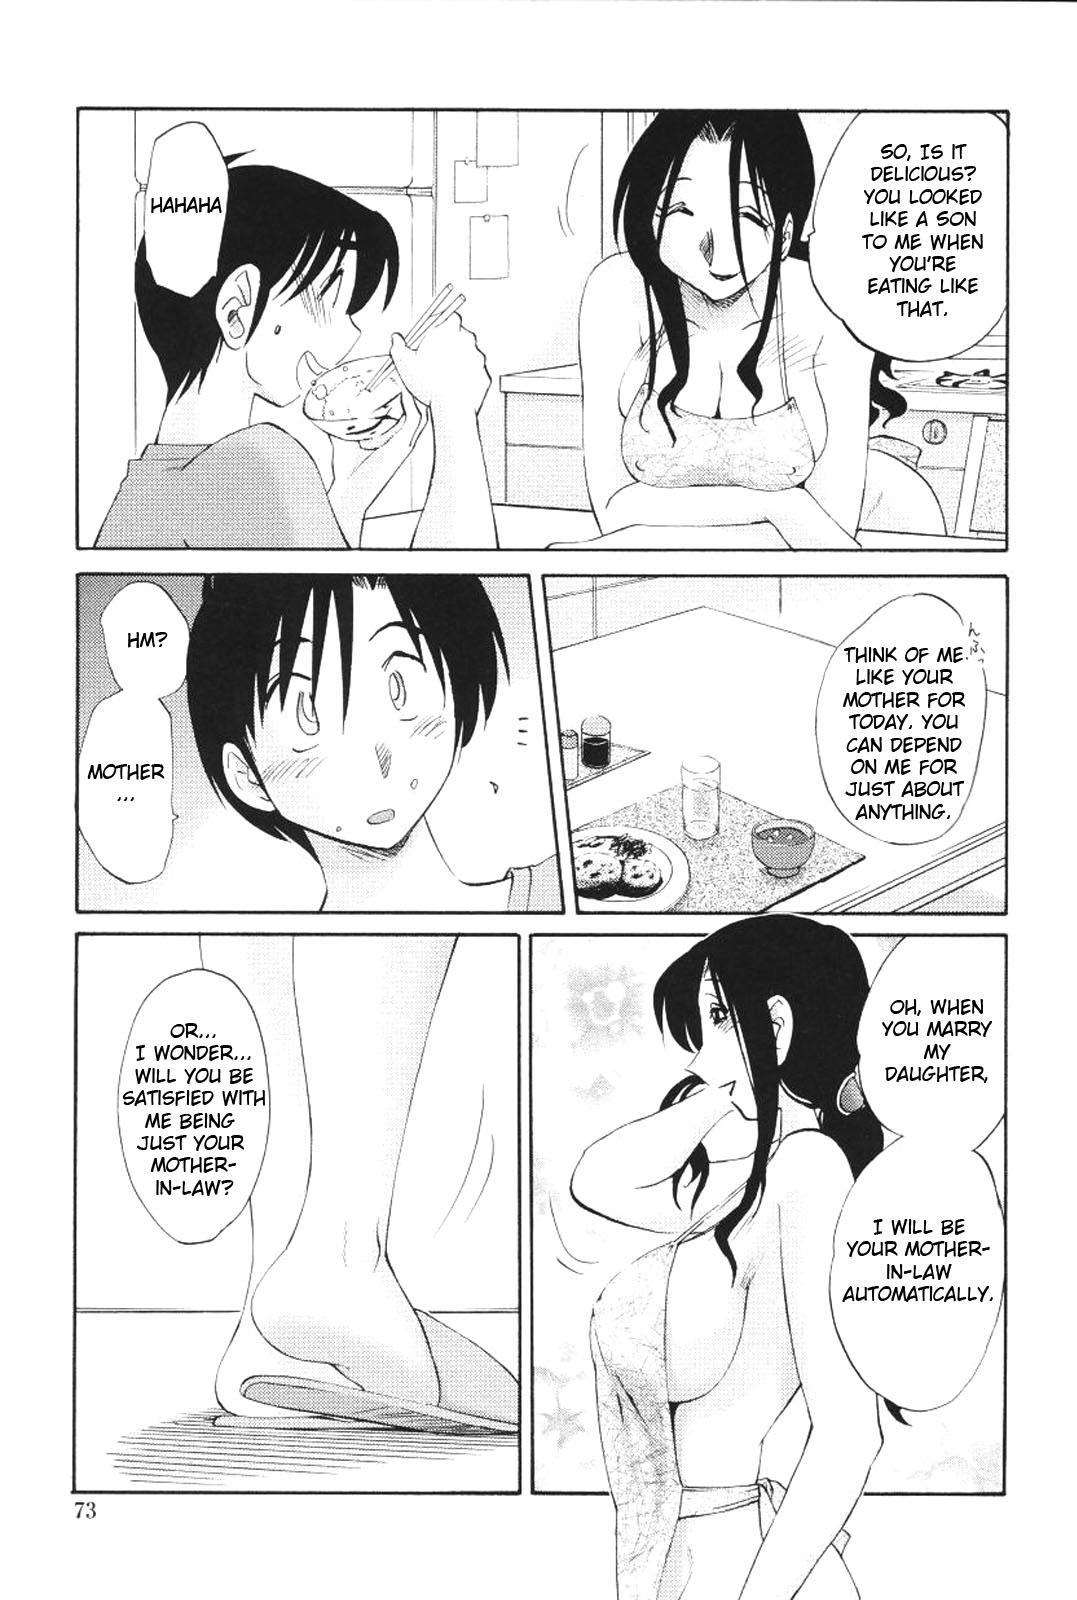 My Sister is My Wife Chapter 12 (English) Translated by Fated Cricle 2